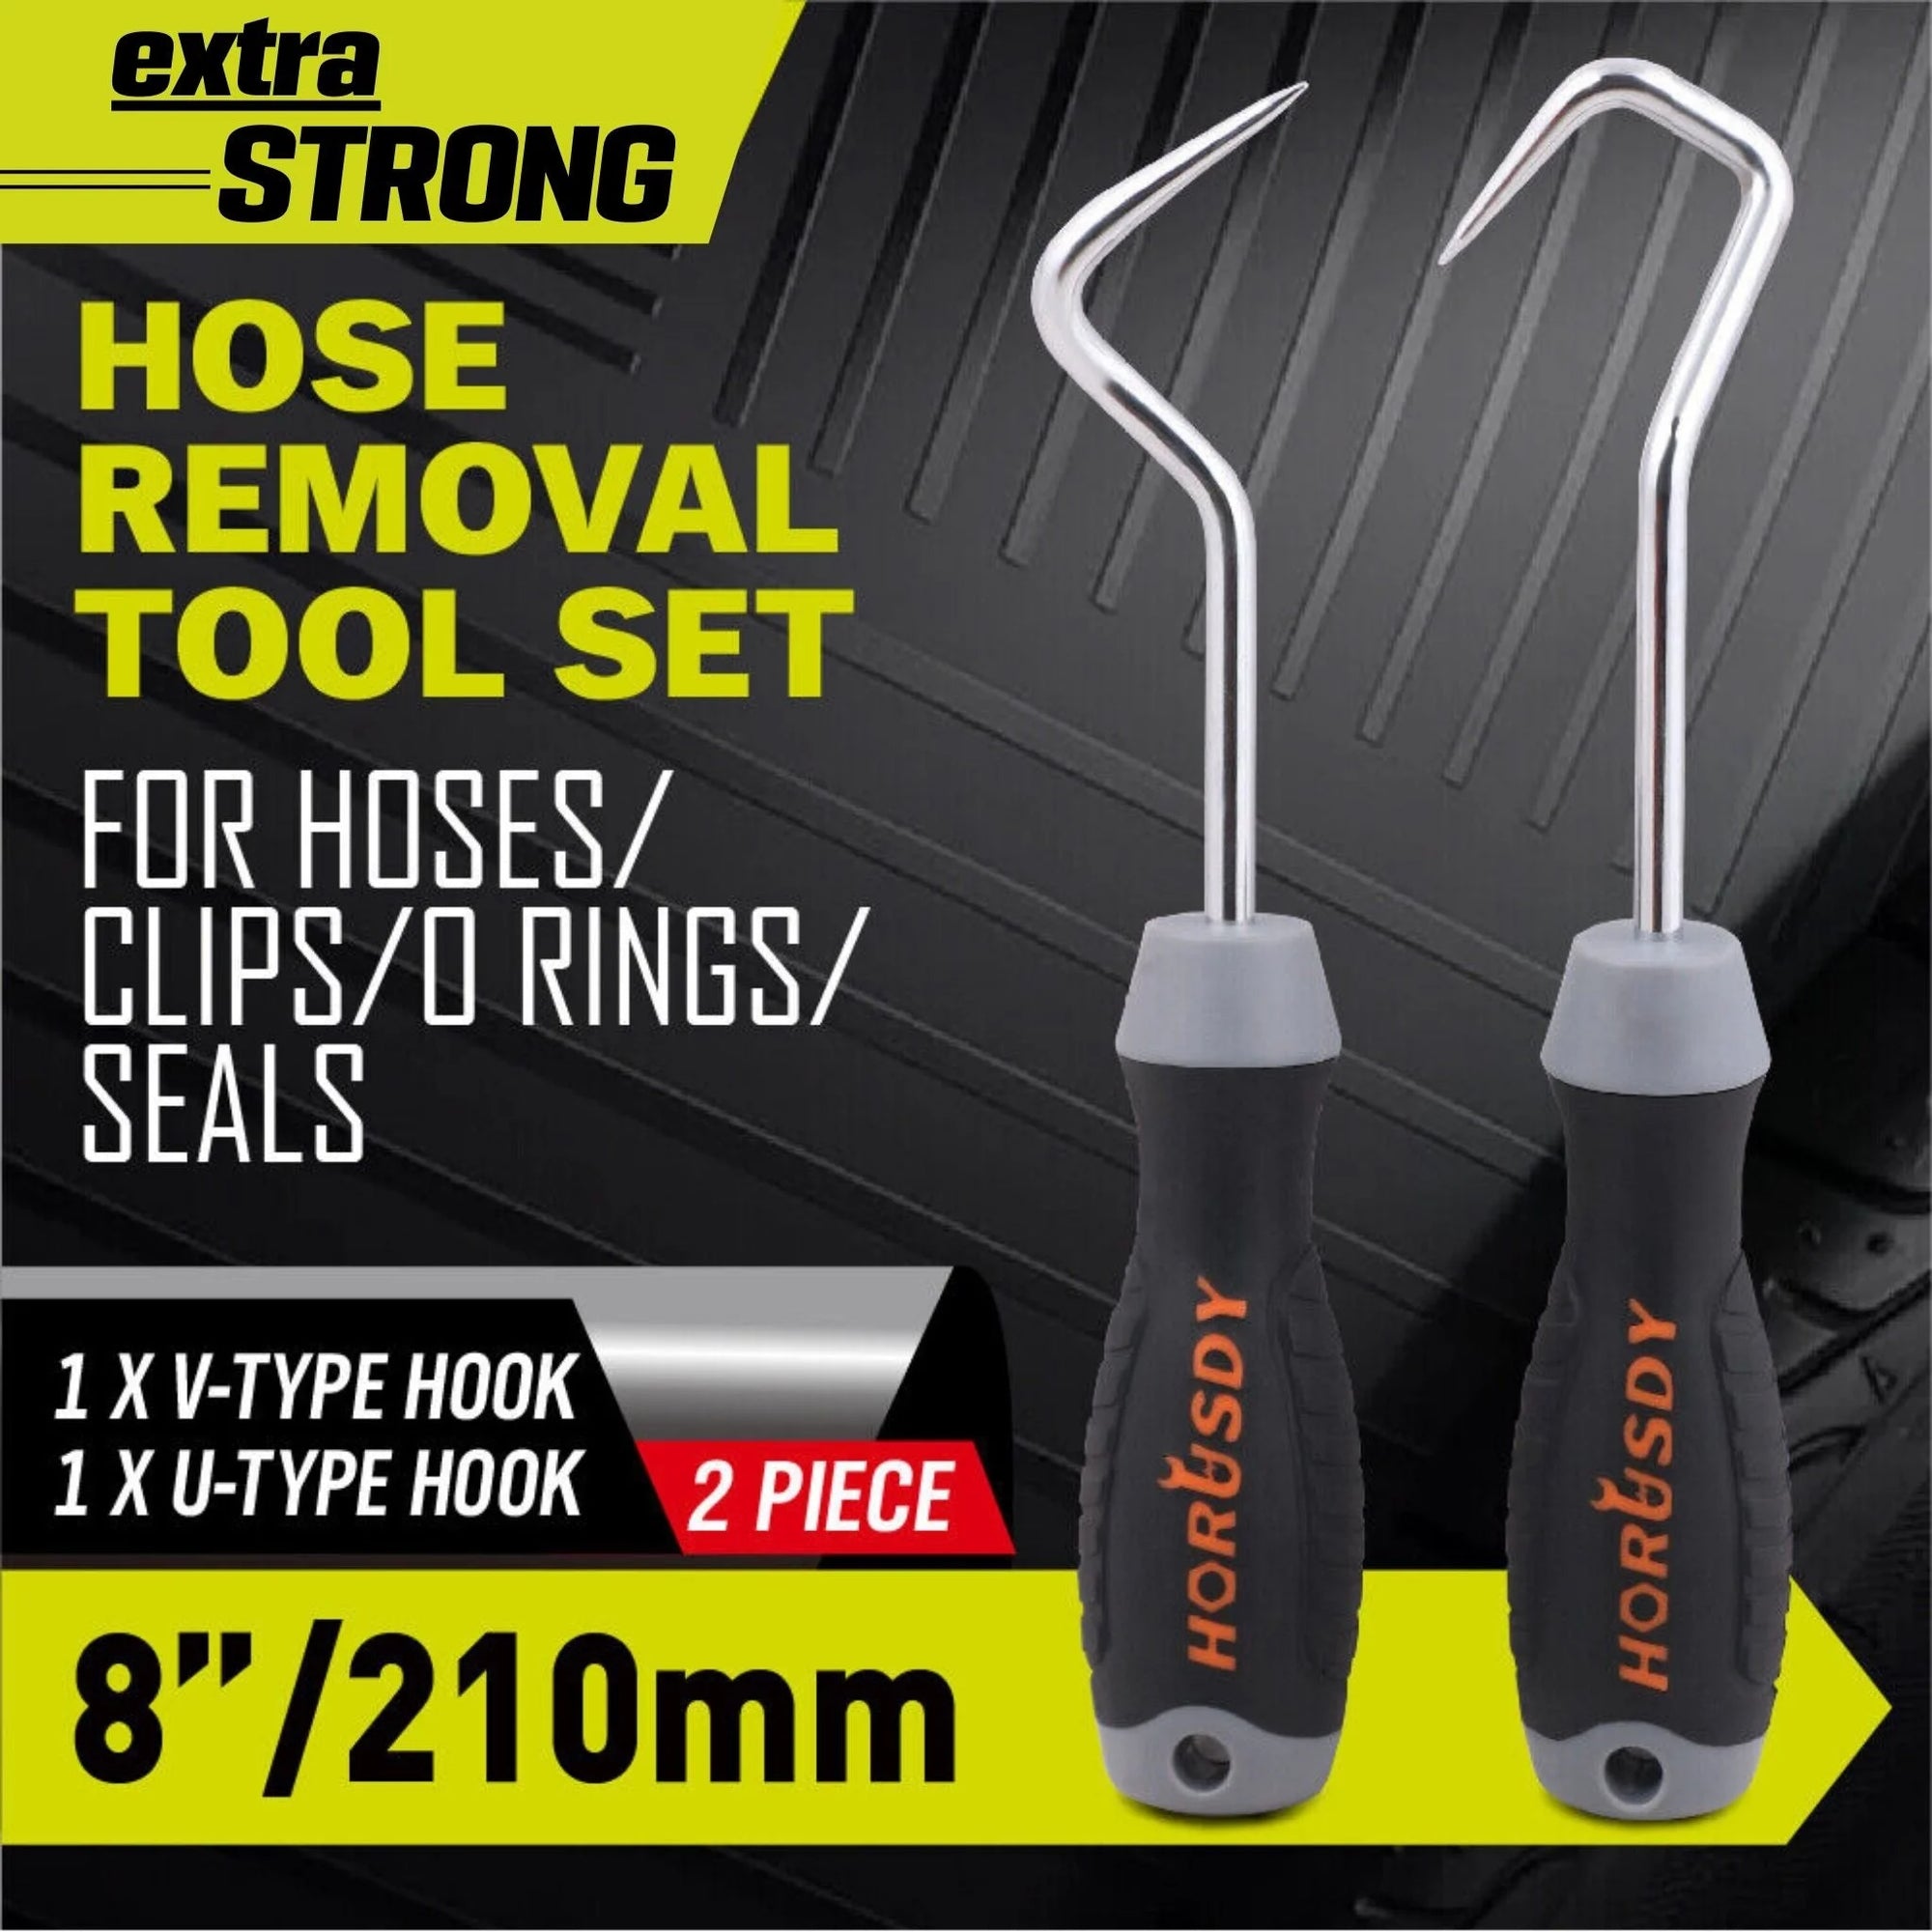 2 piece Hose Removal Hook Pick Set - South East Clearance Centre